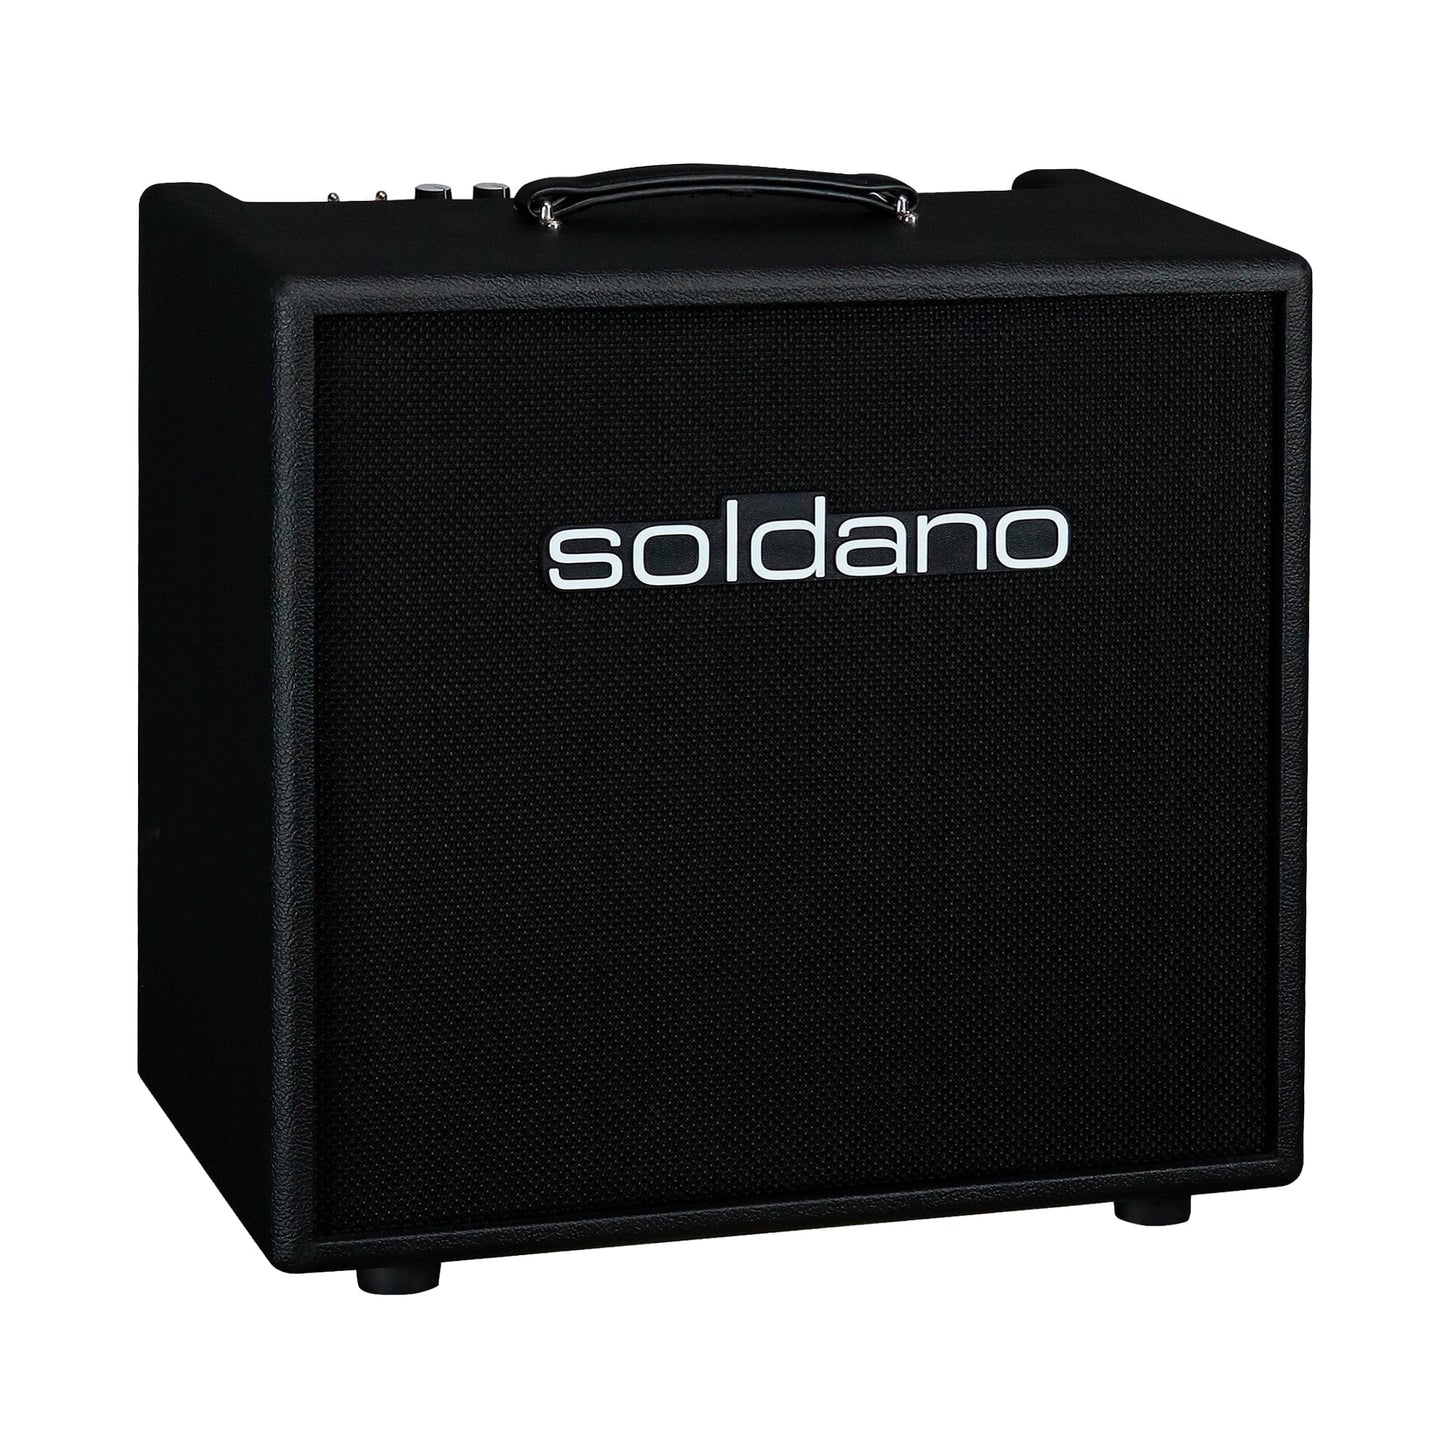 Soldano Super Lead Overdrive 1x12 30w All Tube Combo Amp Black Amps / Guitar Combos